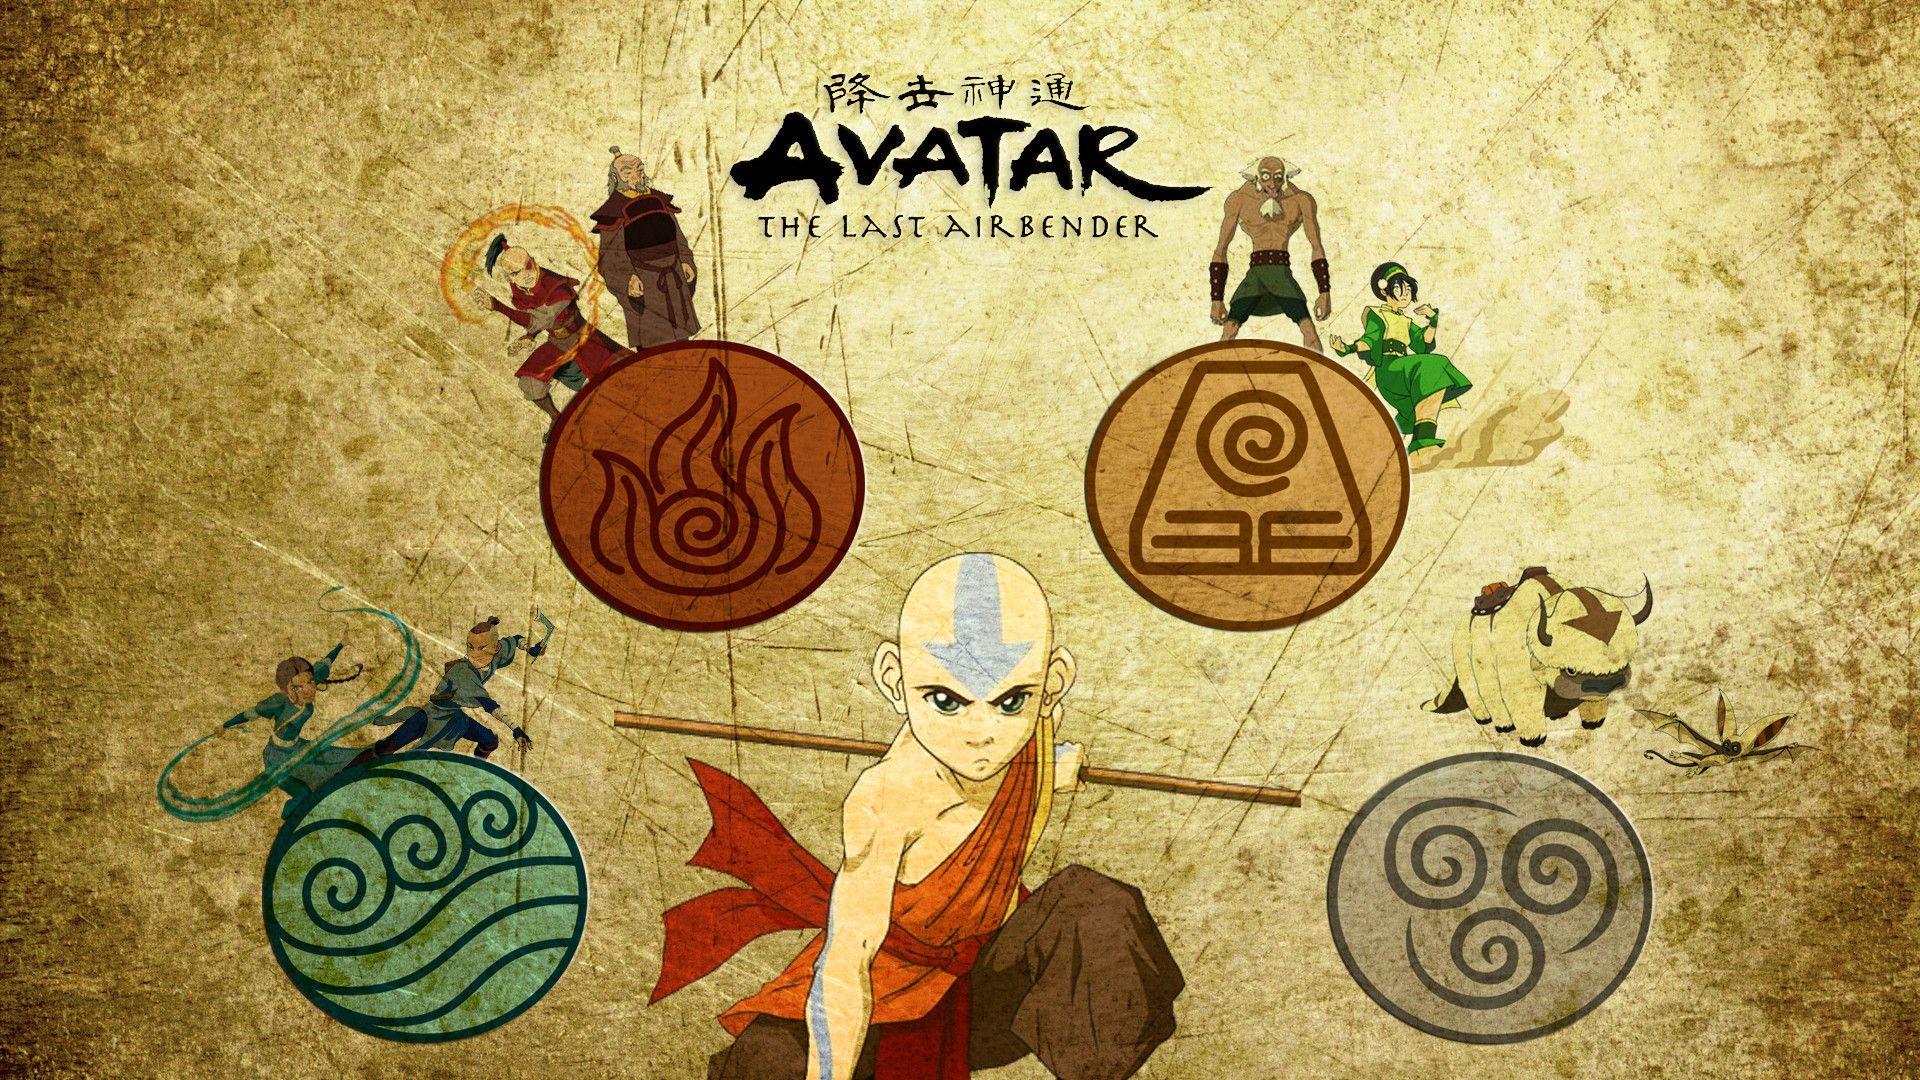 Avatar The Last Airbender Wallpapers Top Free Avatar The Last Airbender Backgrounds 2579